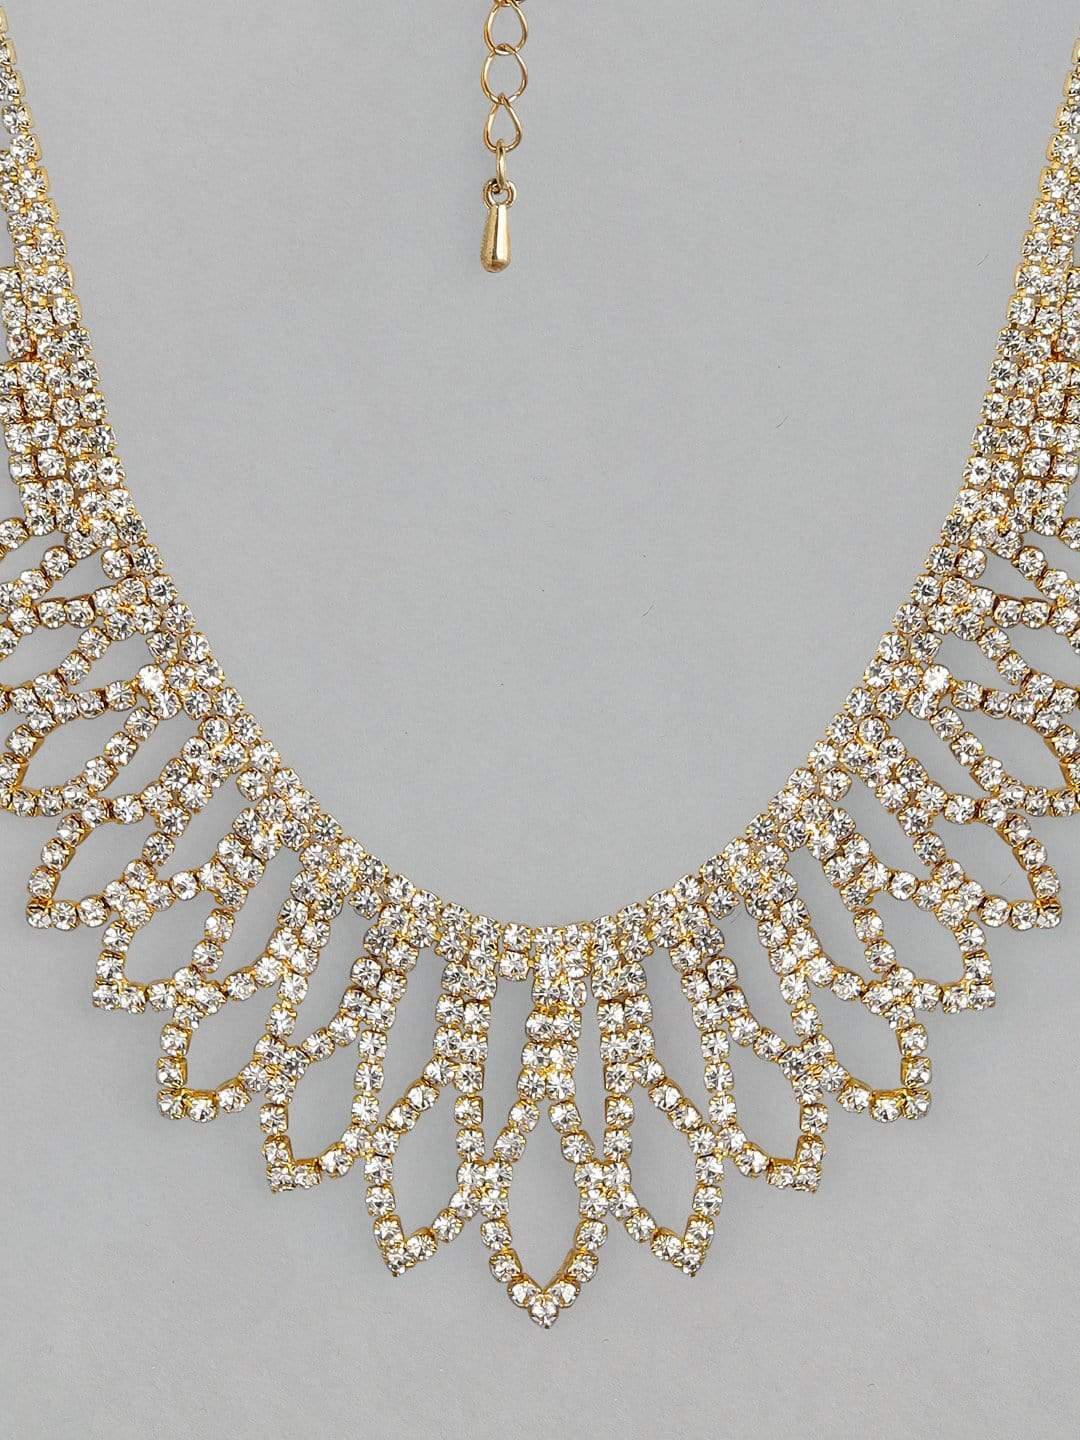 Rubans Gold Toned Handcrafted Rhinestone Necklace Chain & Necklaces